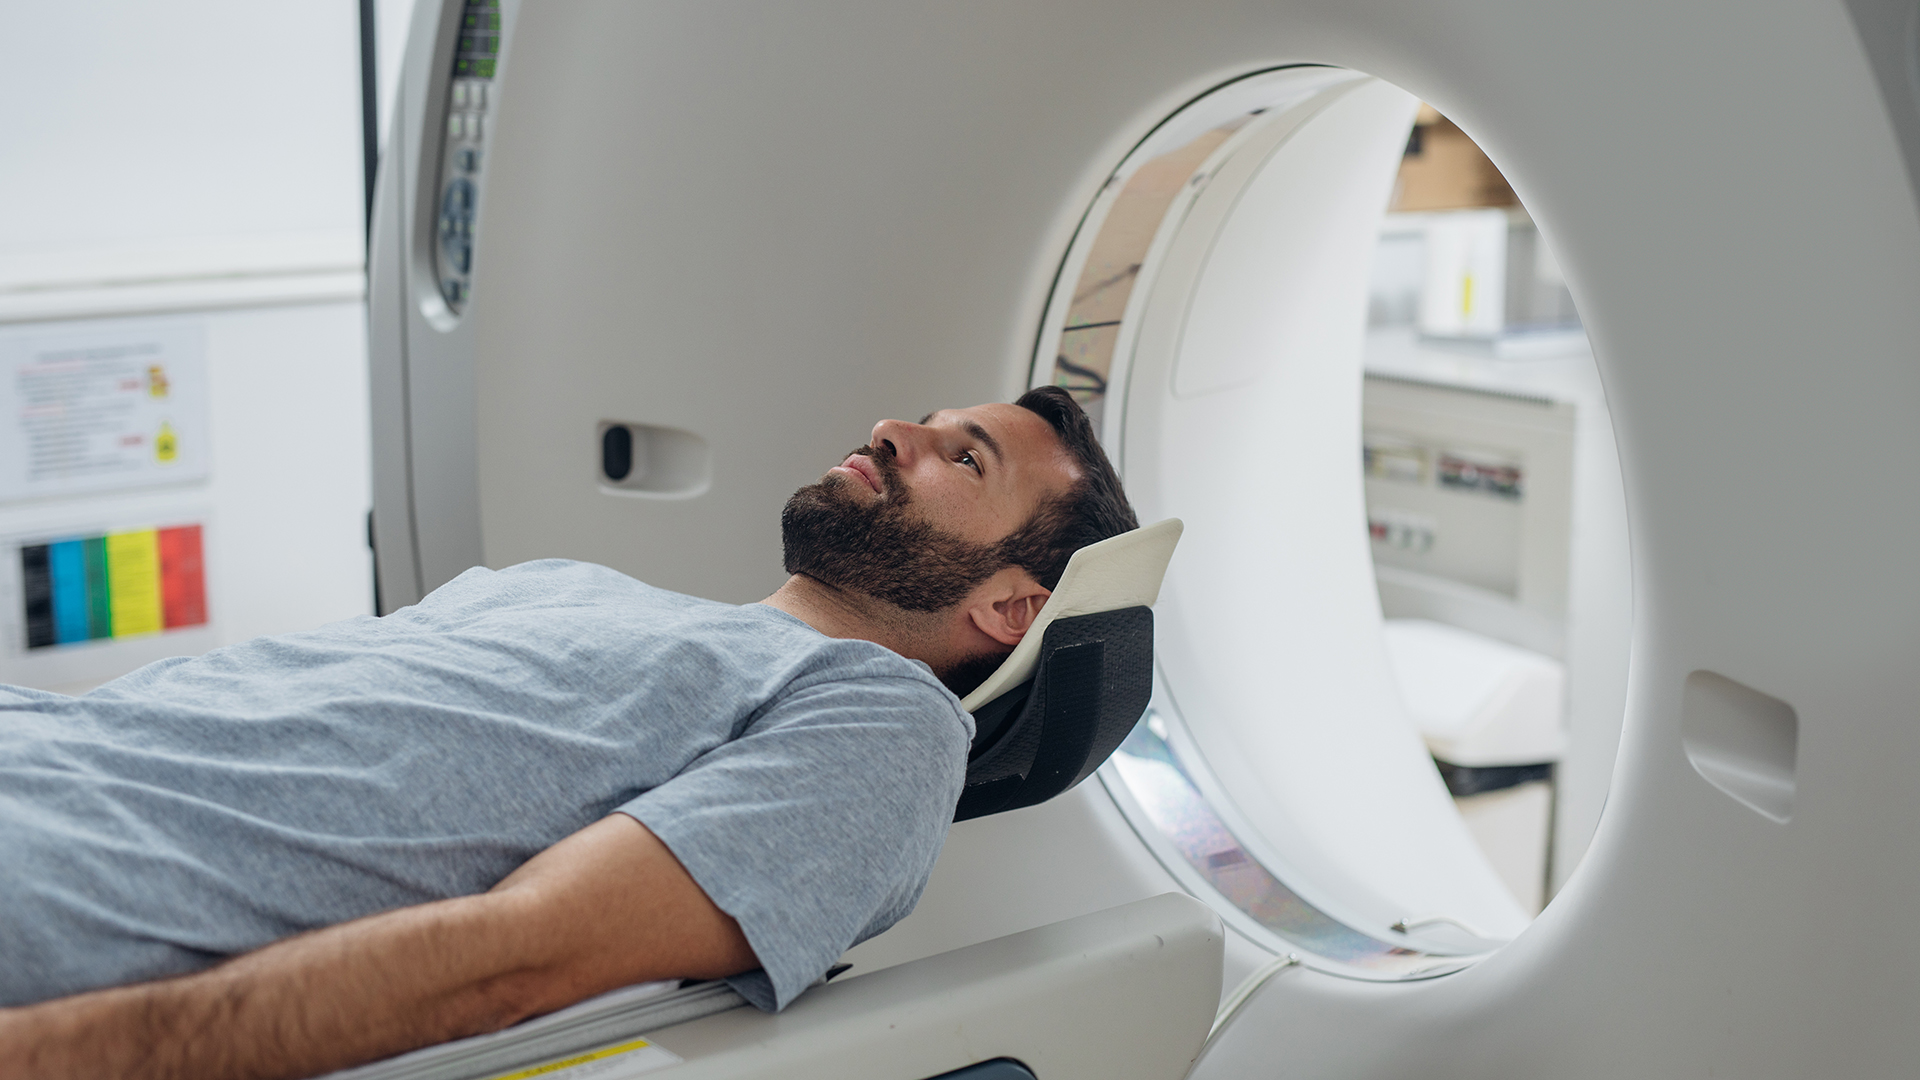 Using CT scans in treatment for high blood pressure